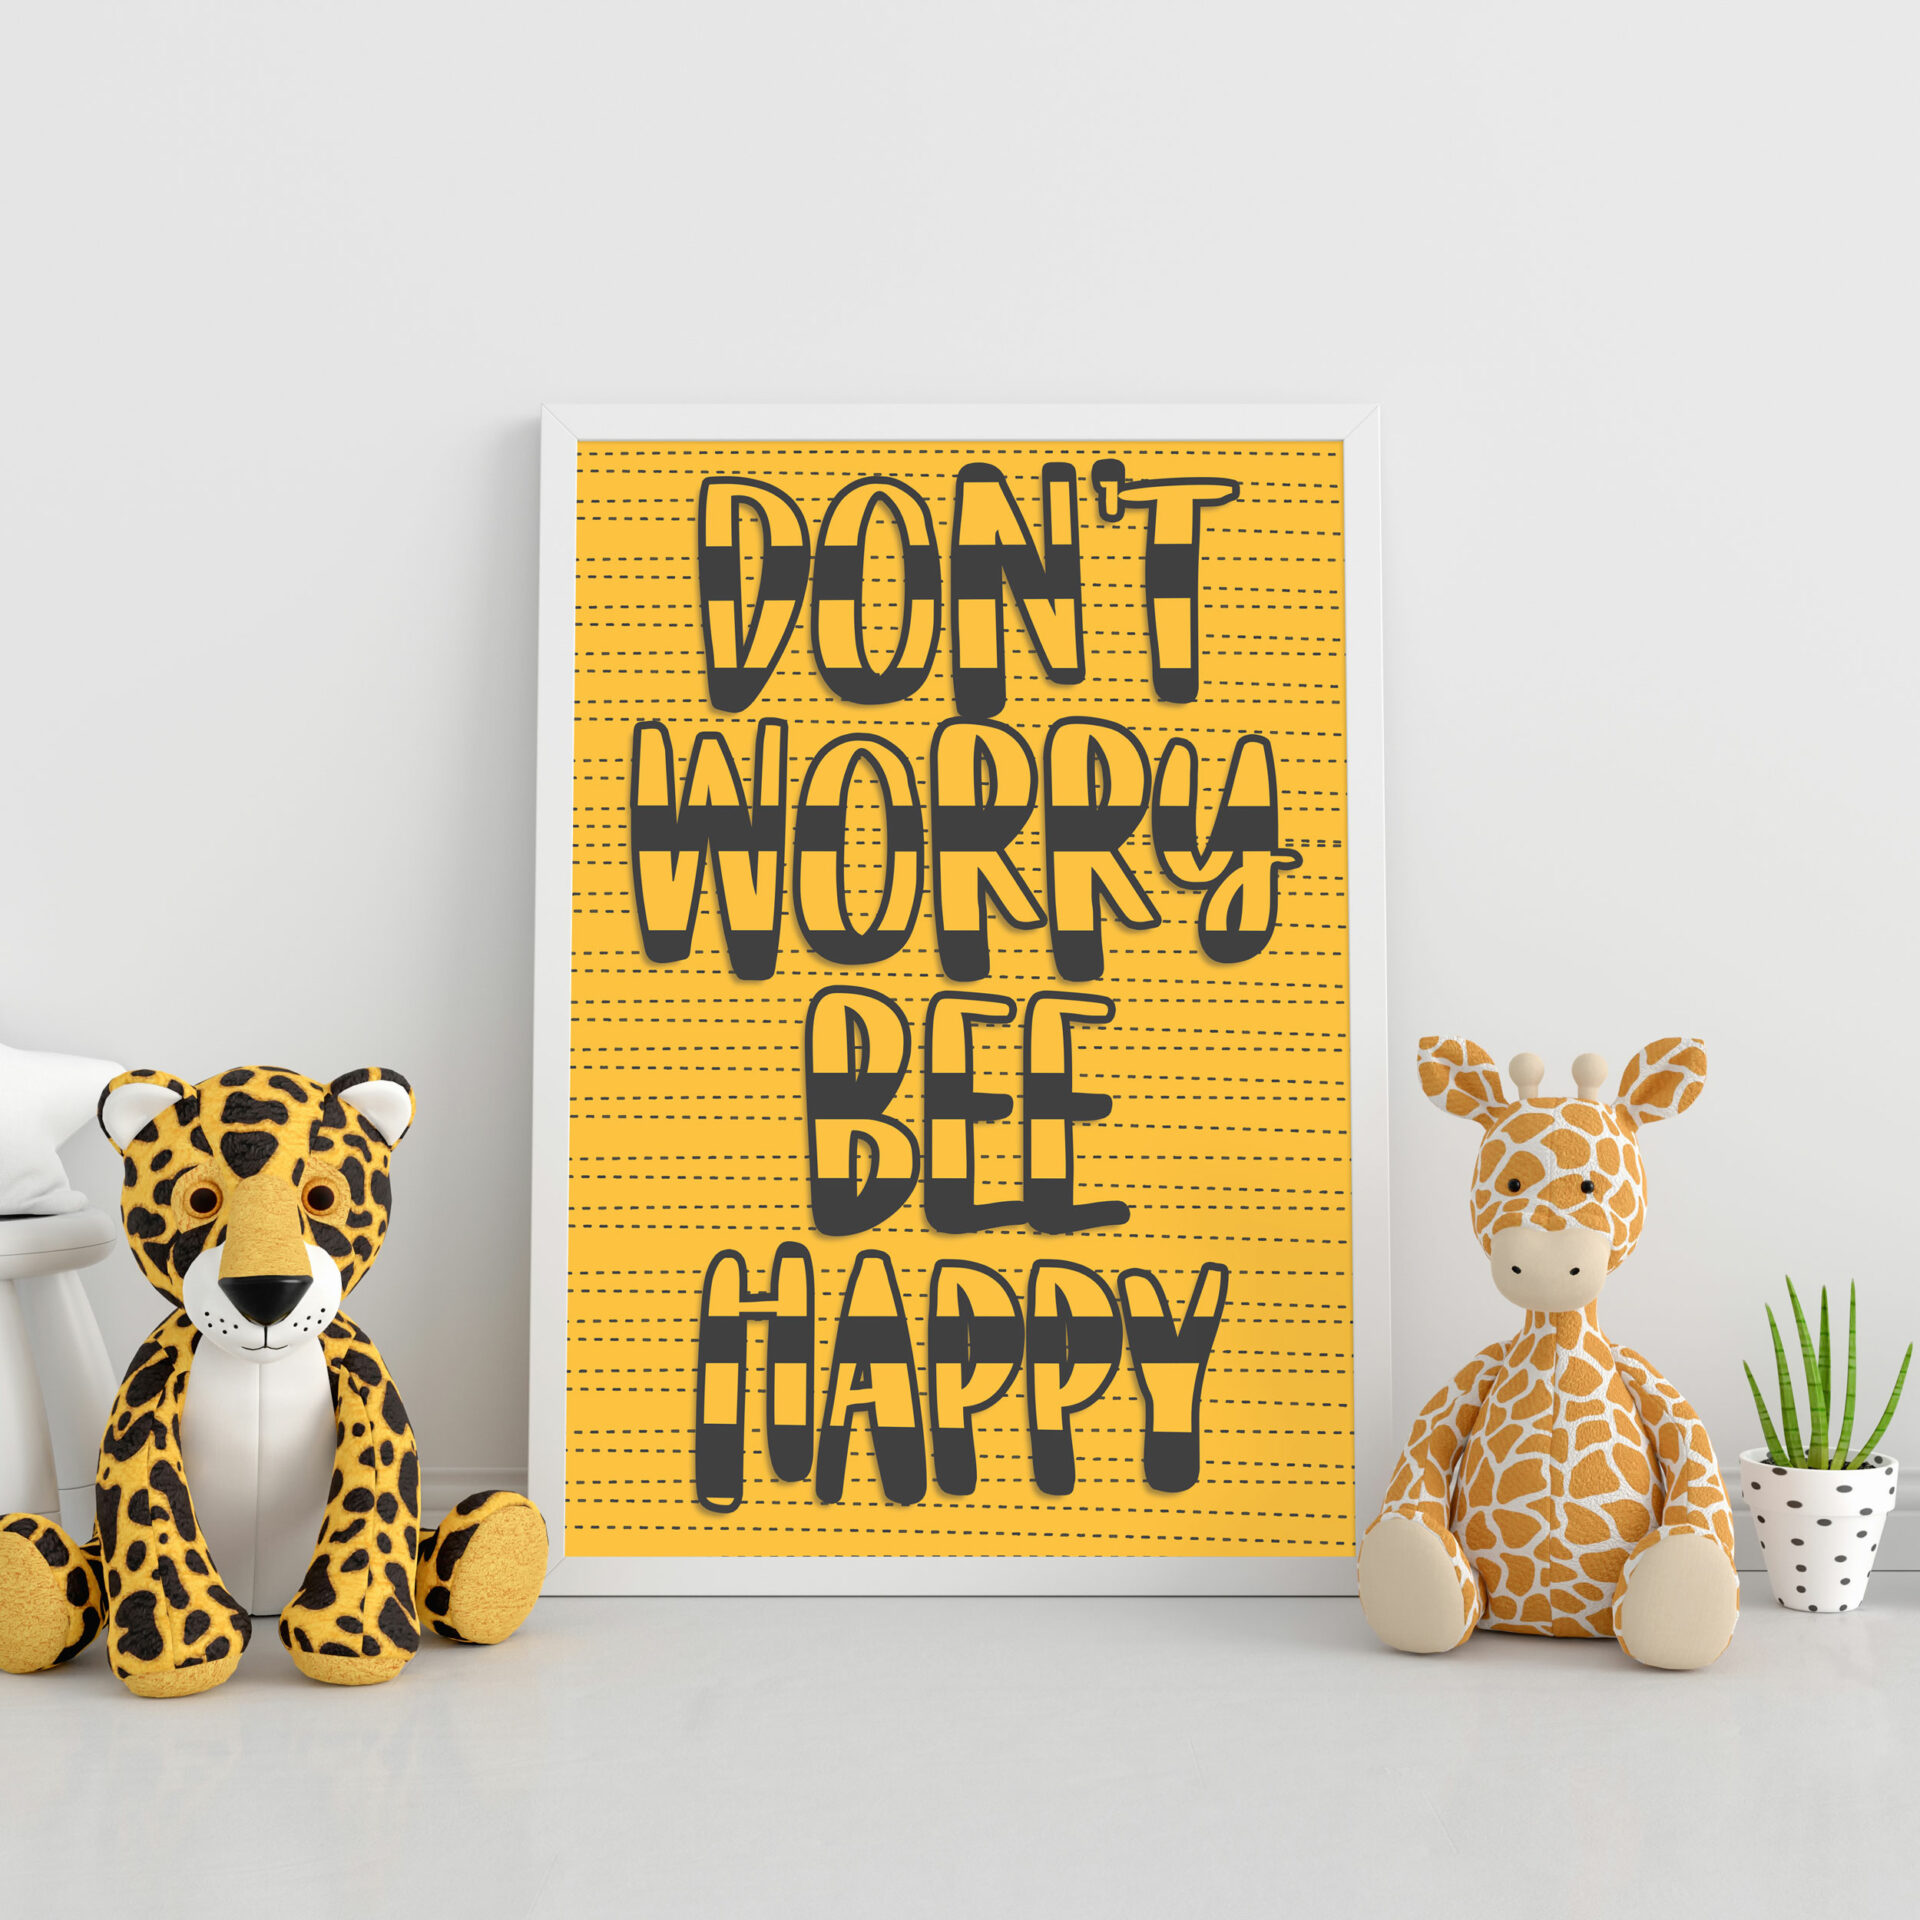 Don't worry, bee happy print – Prints With Personality